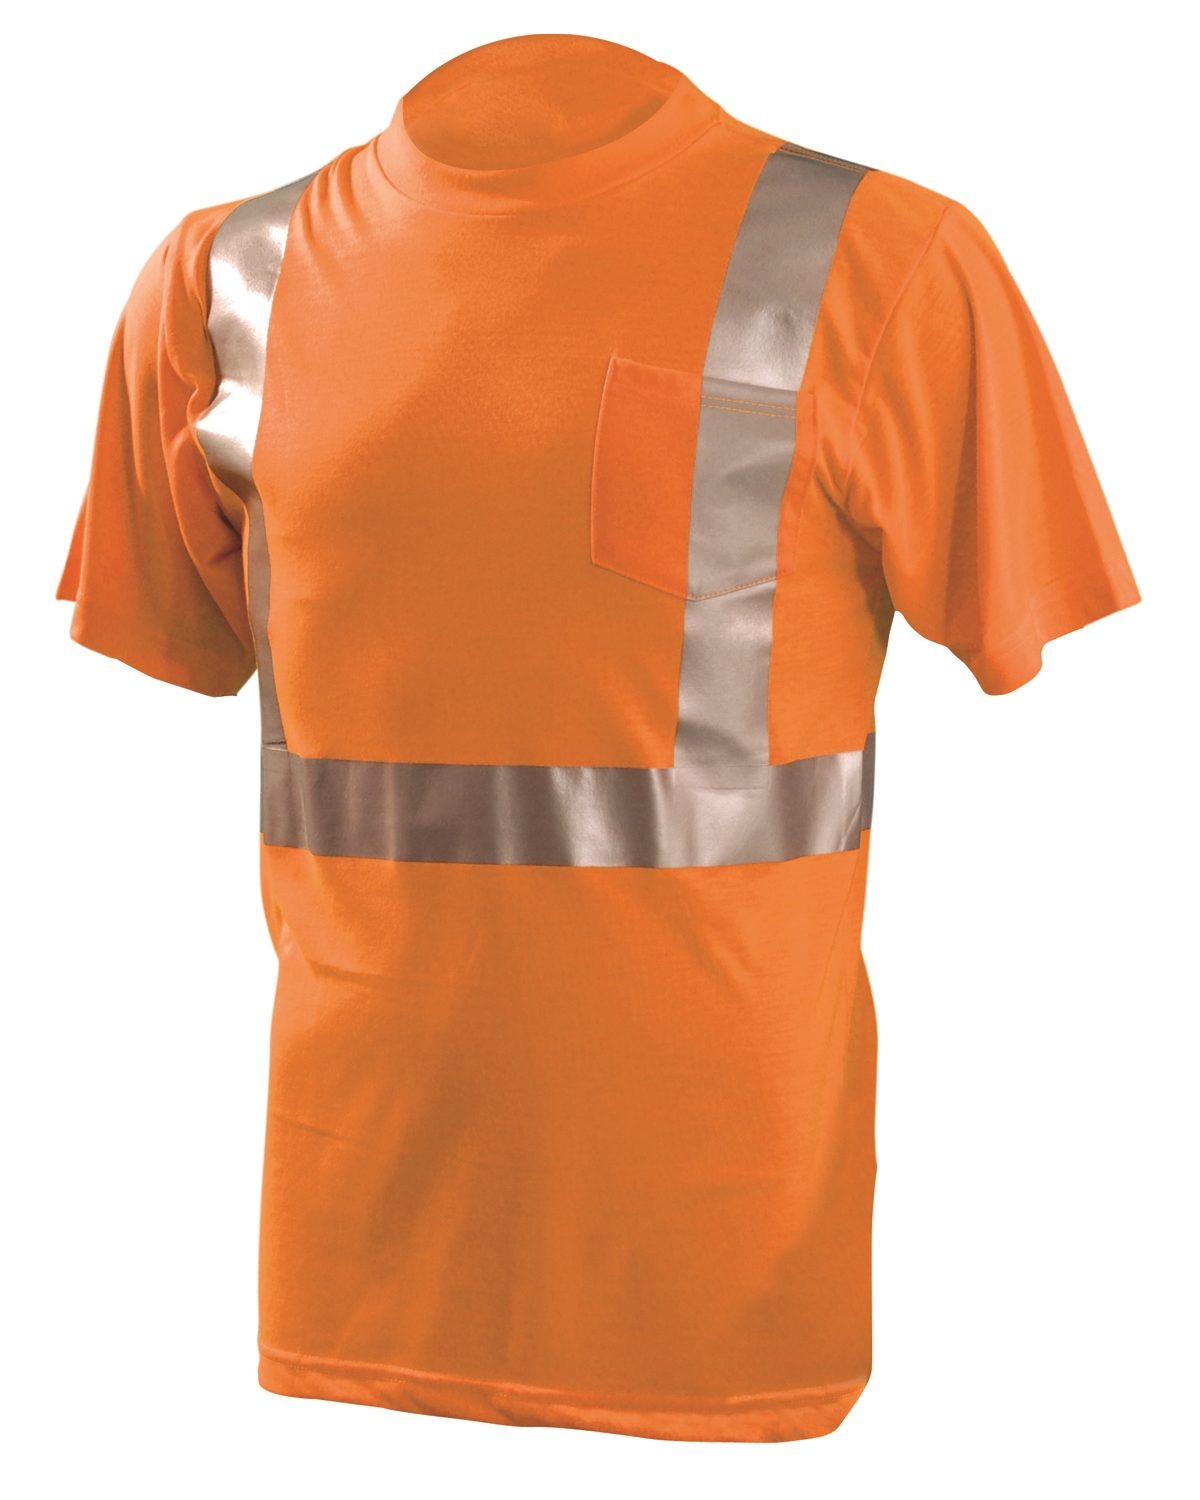 OccuNomix Men's LUX-SSETP Orange and Yellow Reflective Pocket T-Shirts